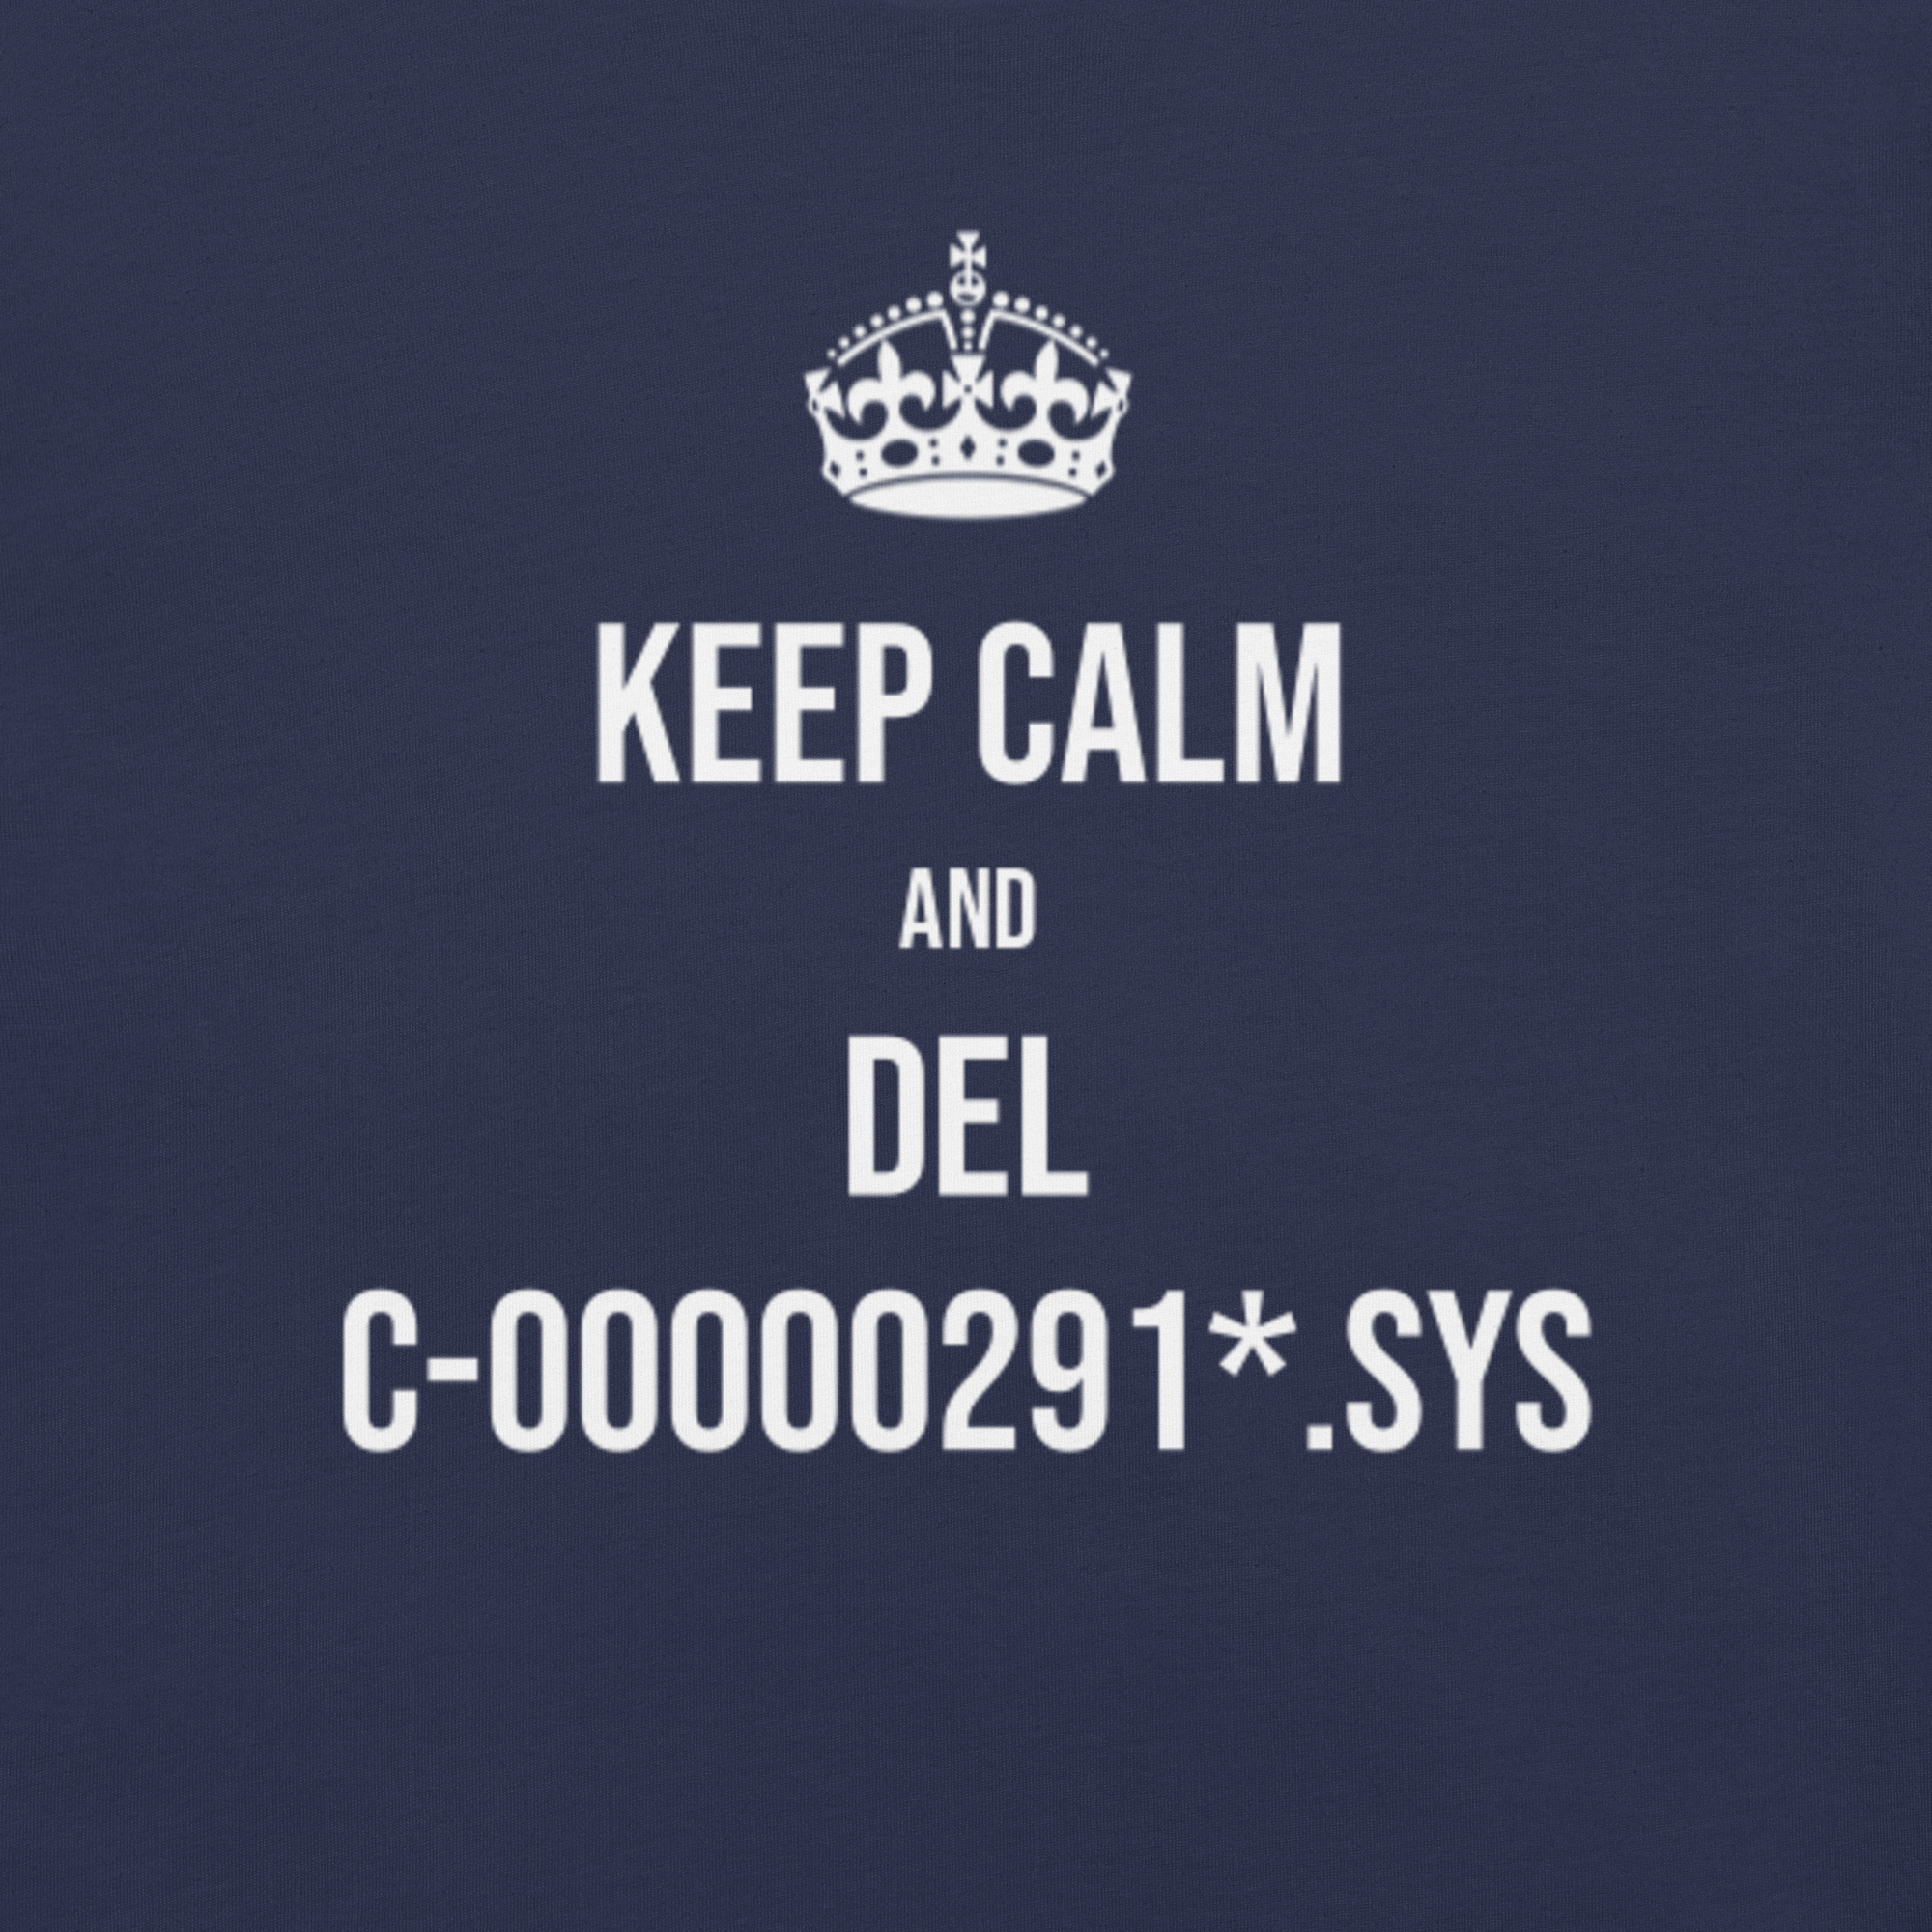 Keep Calm and del C-00000291.sys T-Shirt